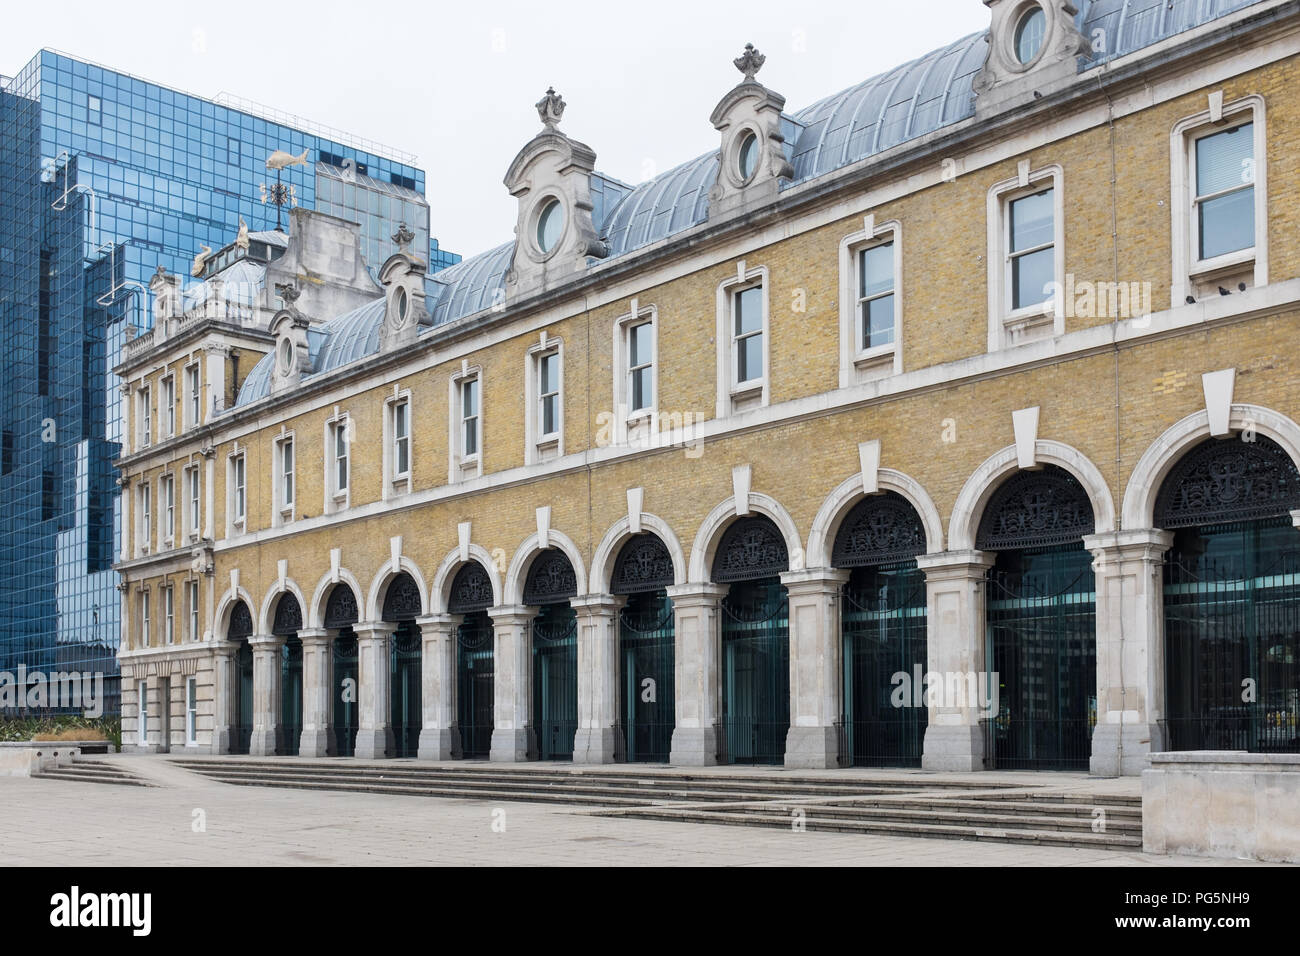 The Old Billingsgate Fish Market victorian building in Lower Thames Street,London which is now a hospitality and events venue Stock Photo